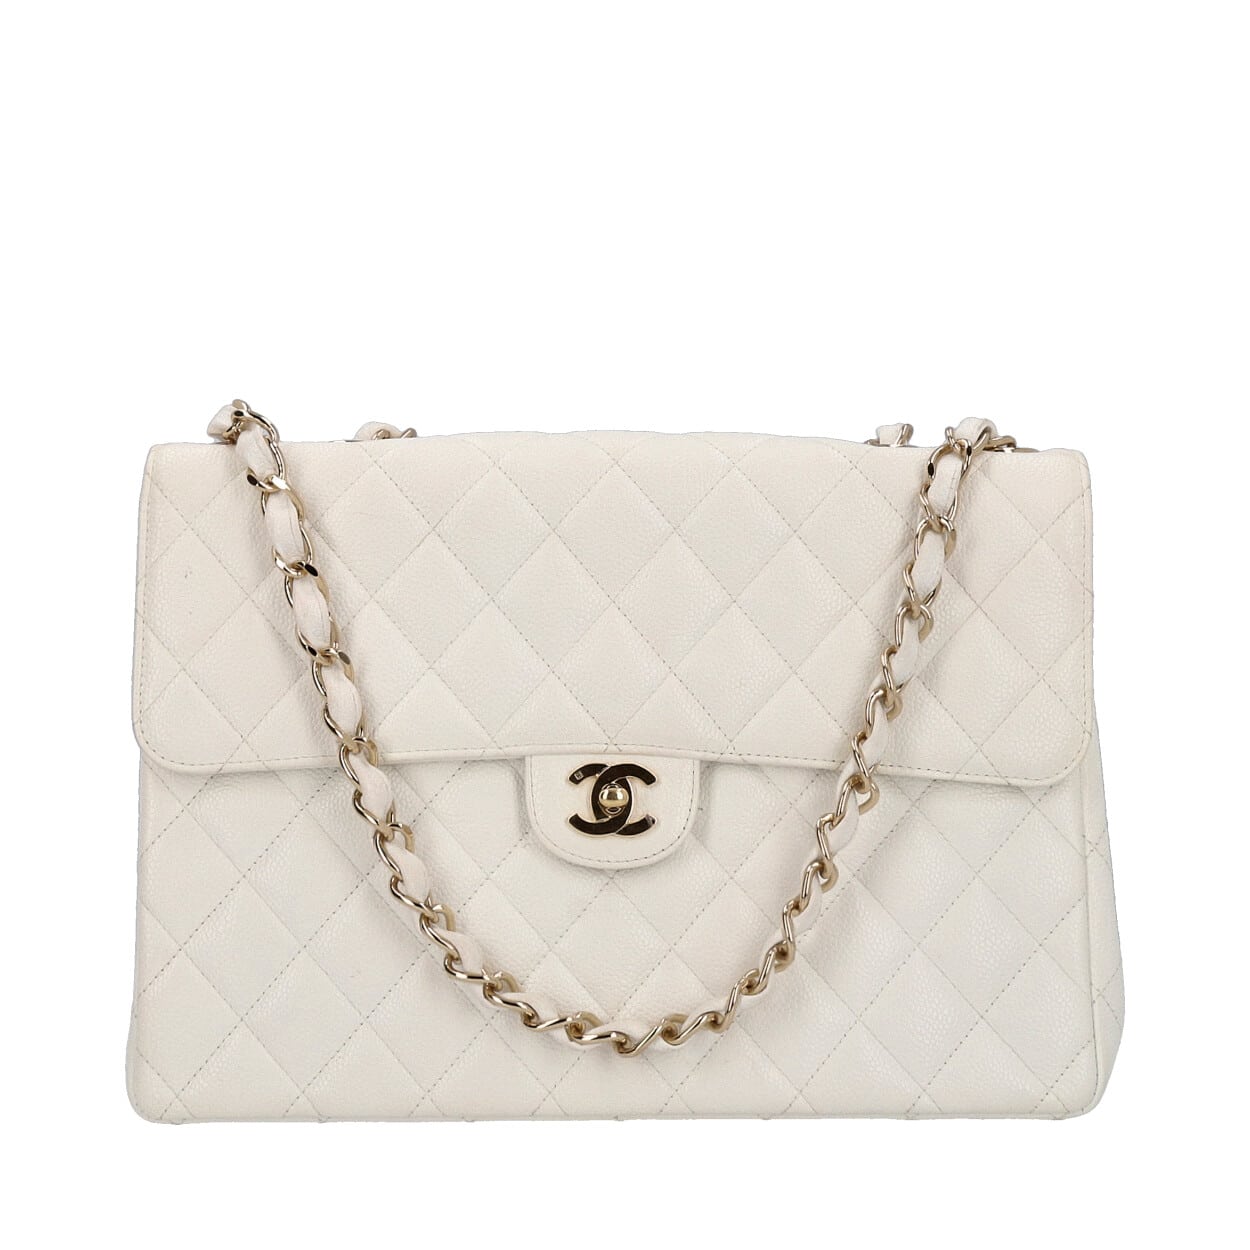 CHANEL Vintage Quilted Caviar Jumbo Flap Bag White